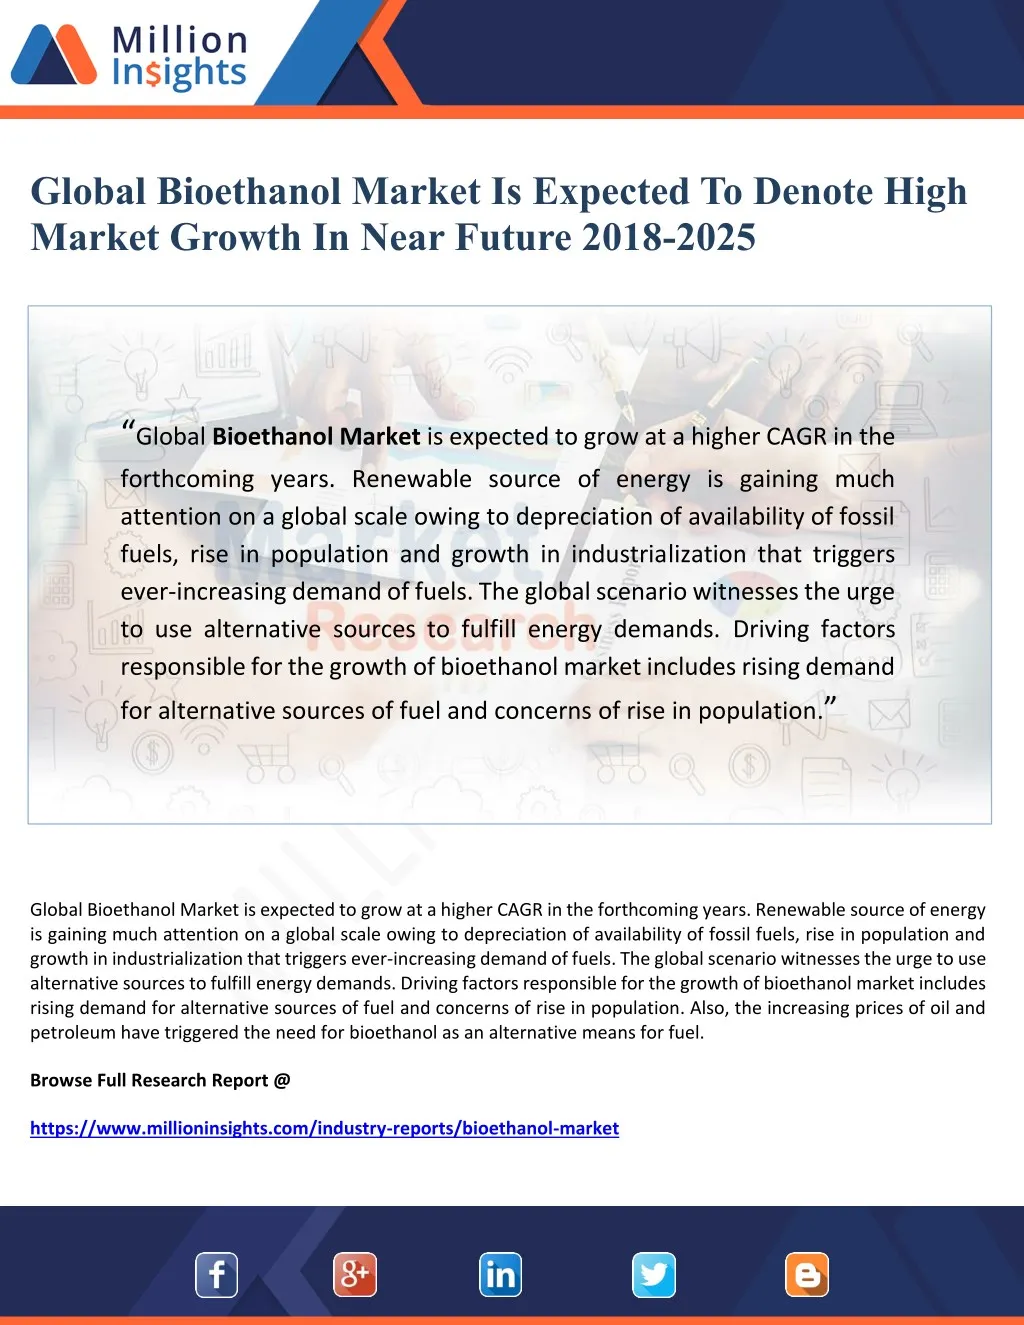 global bioethanol market is expected to denote